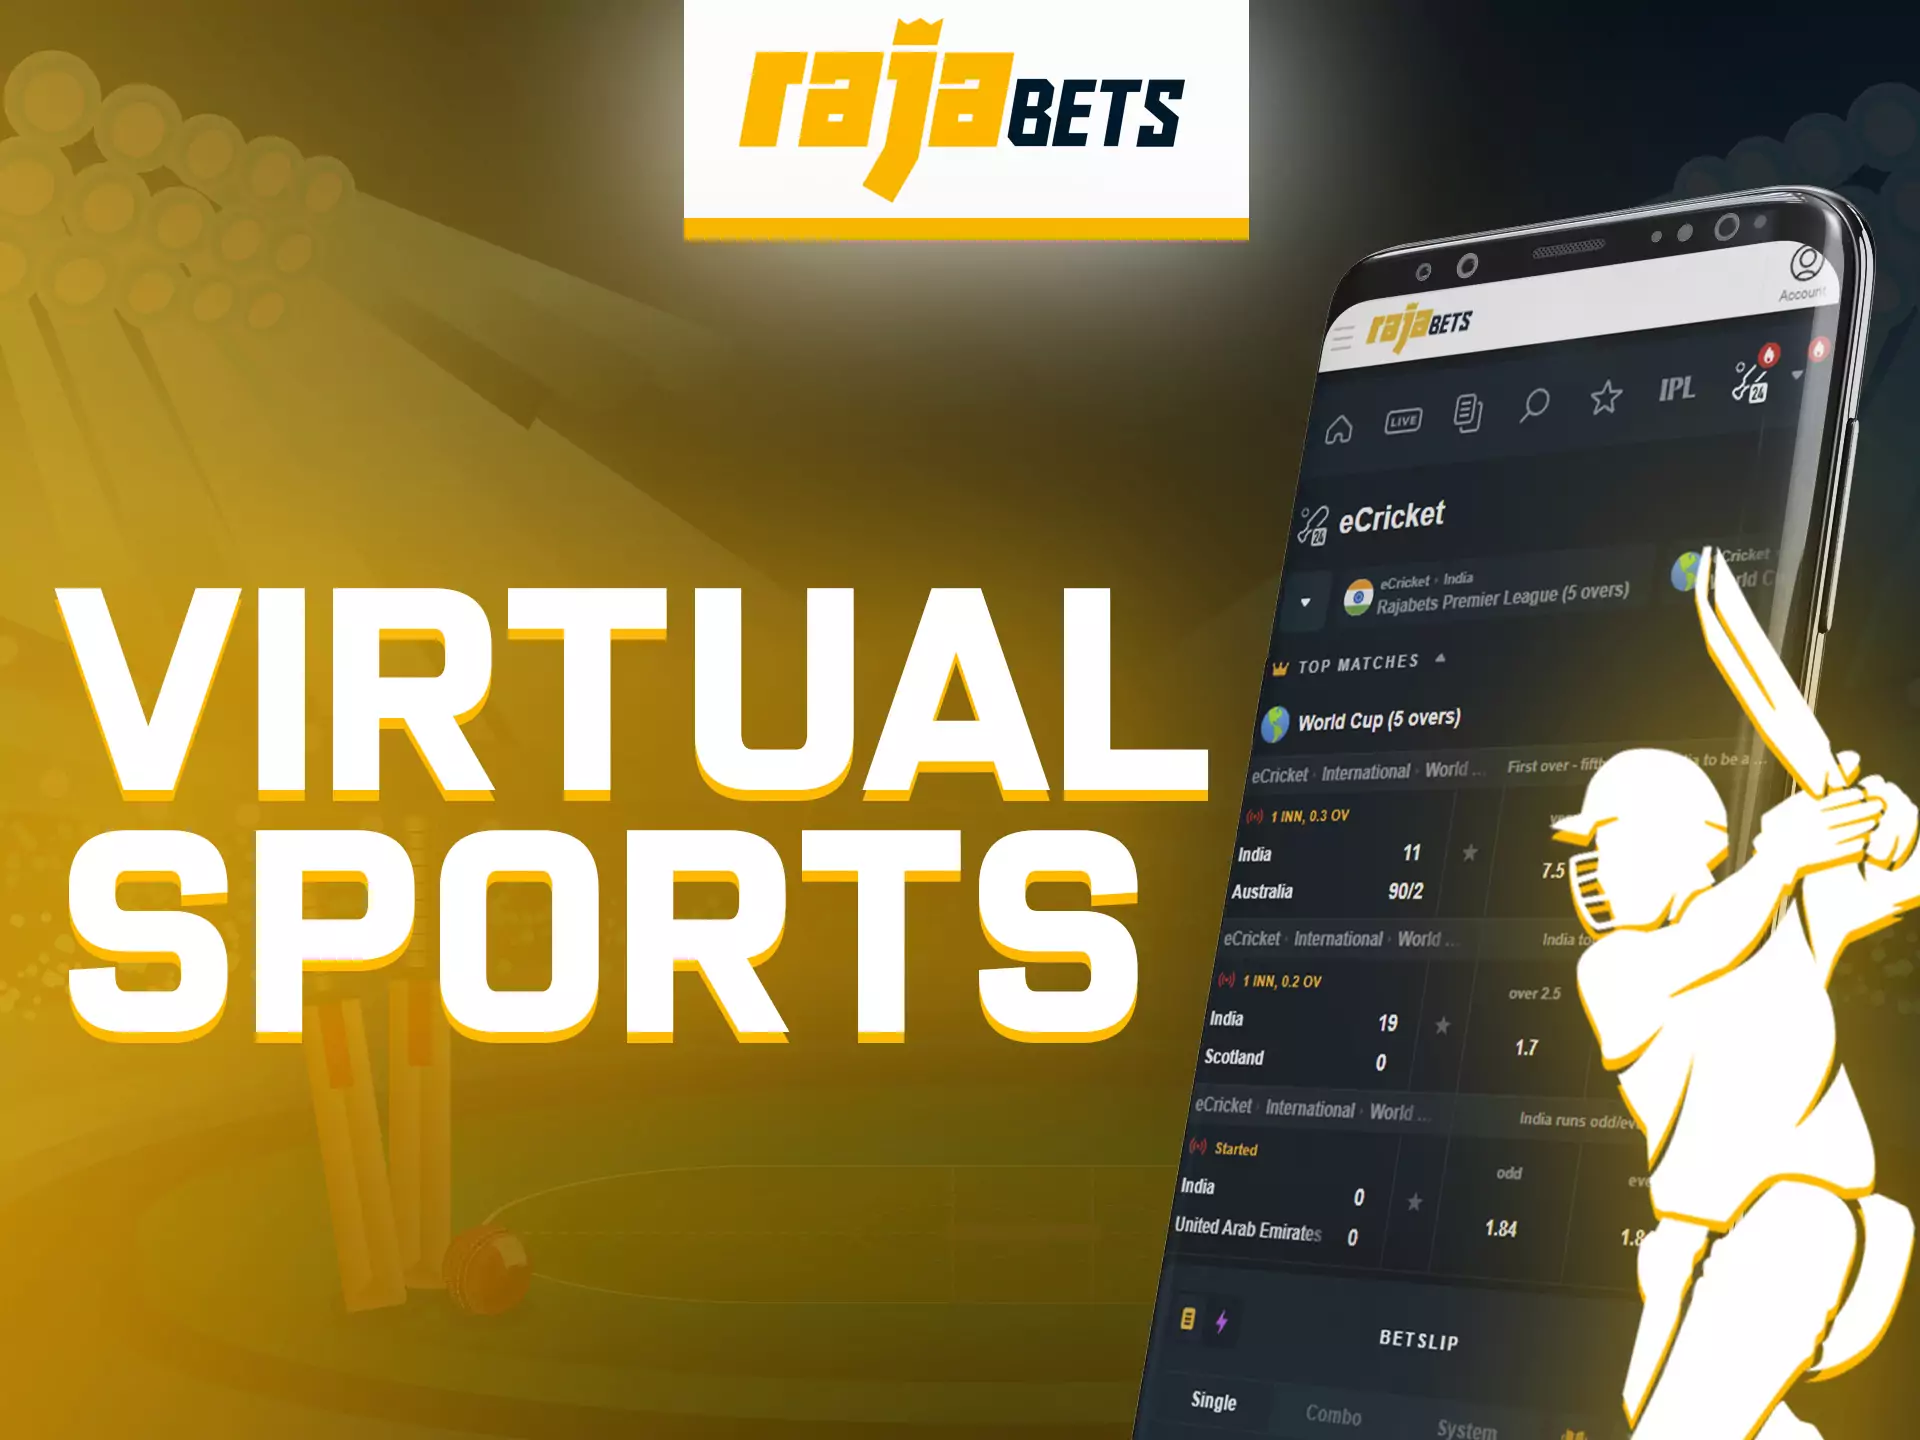 On Rajabets app you have the opportunity to bet on virtual sports.